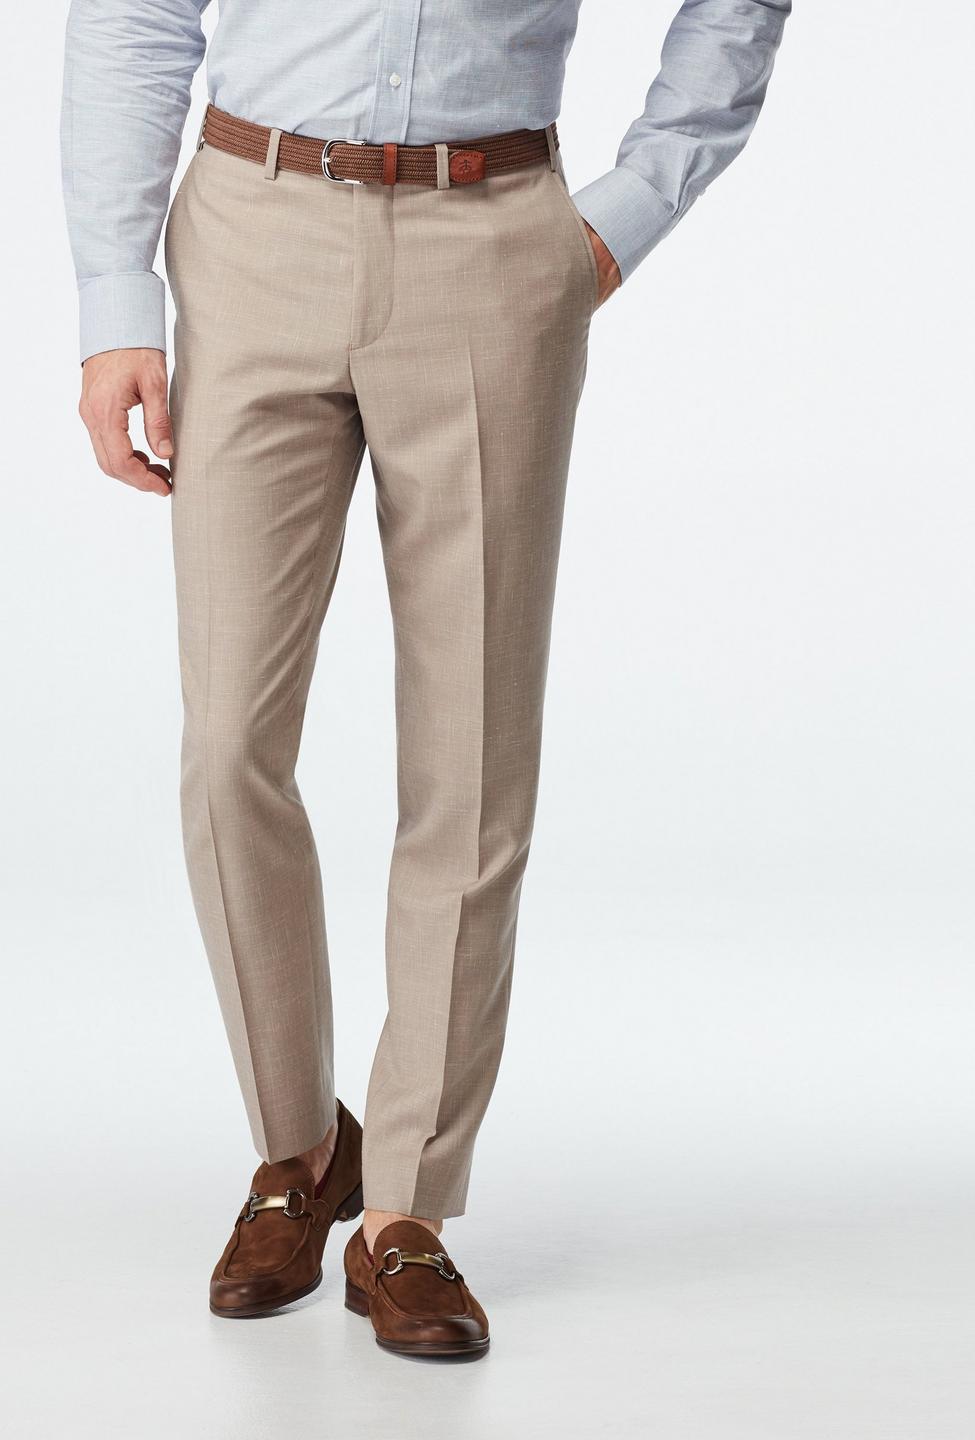 Brown pants - Stockport Solid Design from Seasonal Indochino Collection